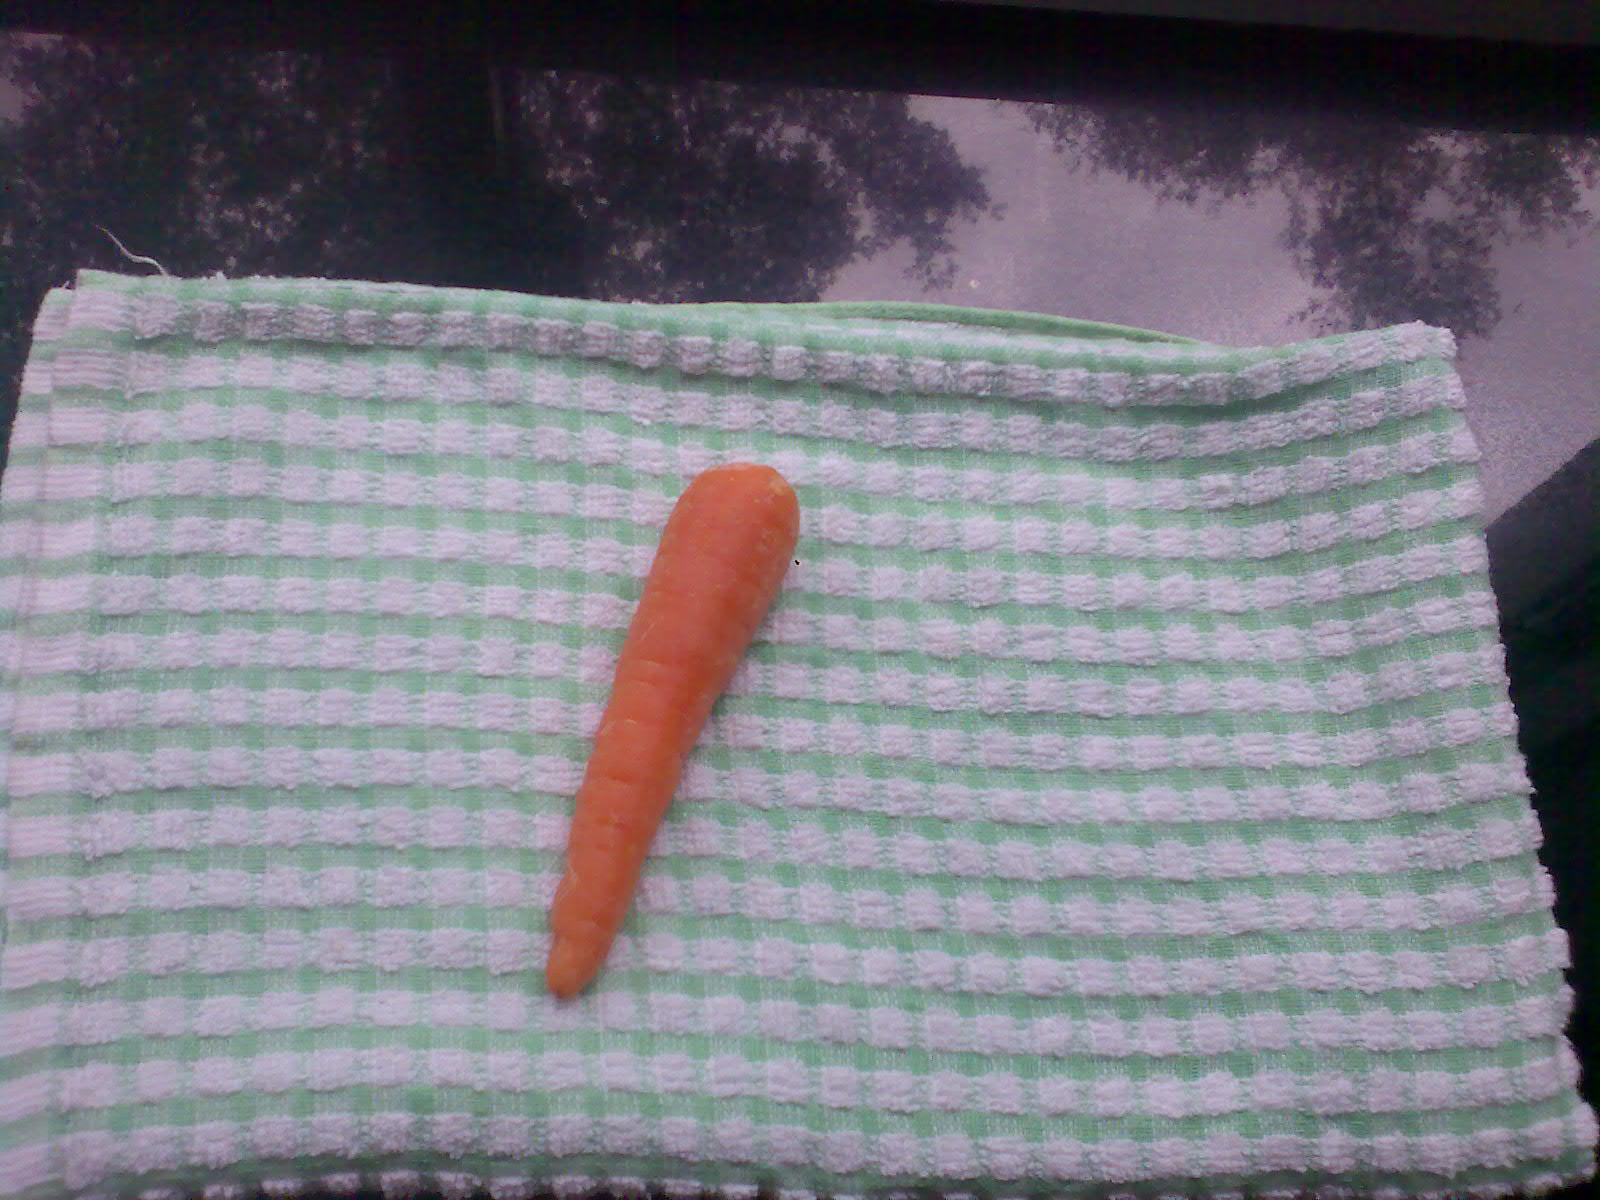 [Lonely+lil'+carrot+in+my+housexD+.jpg]